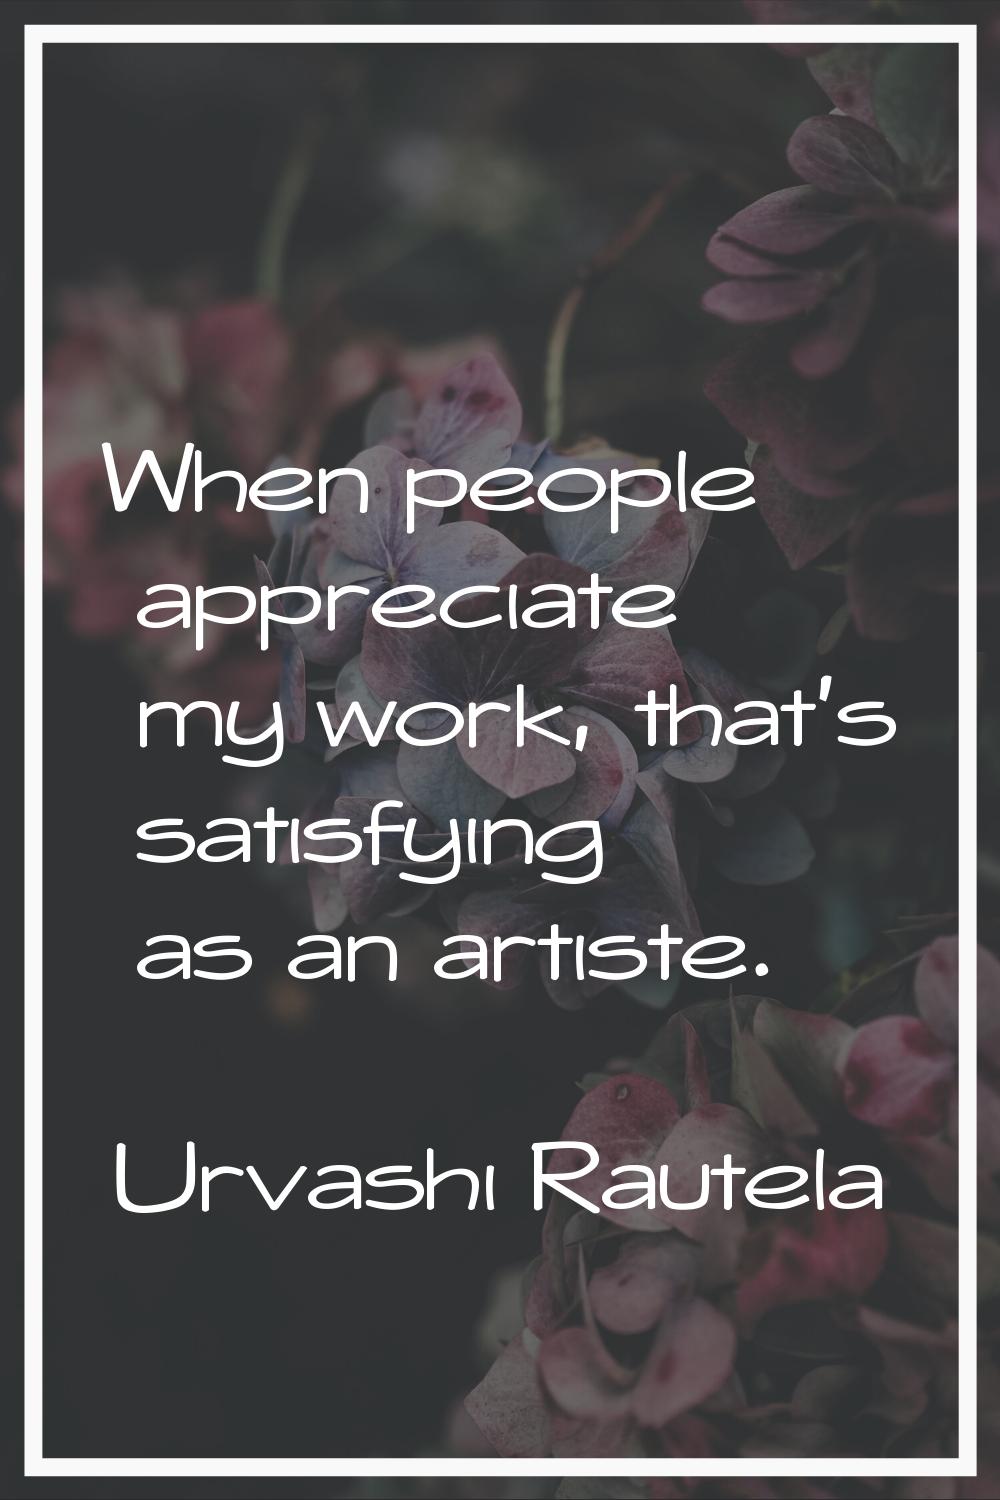 When people appreciate my work, that's satisfying as an artiste.